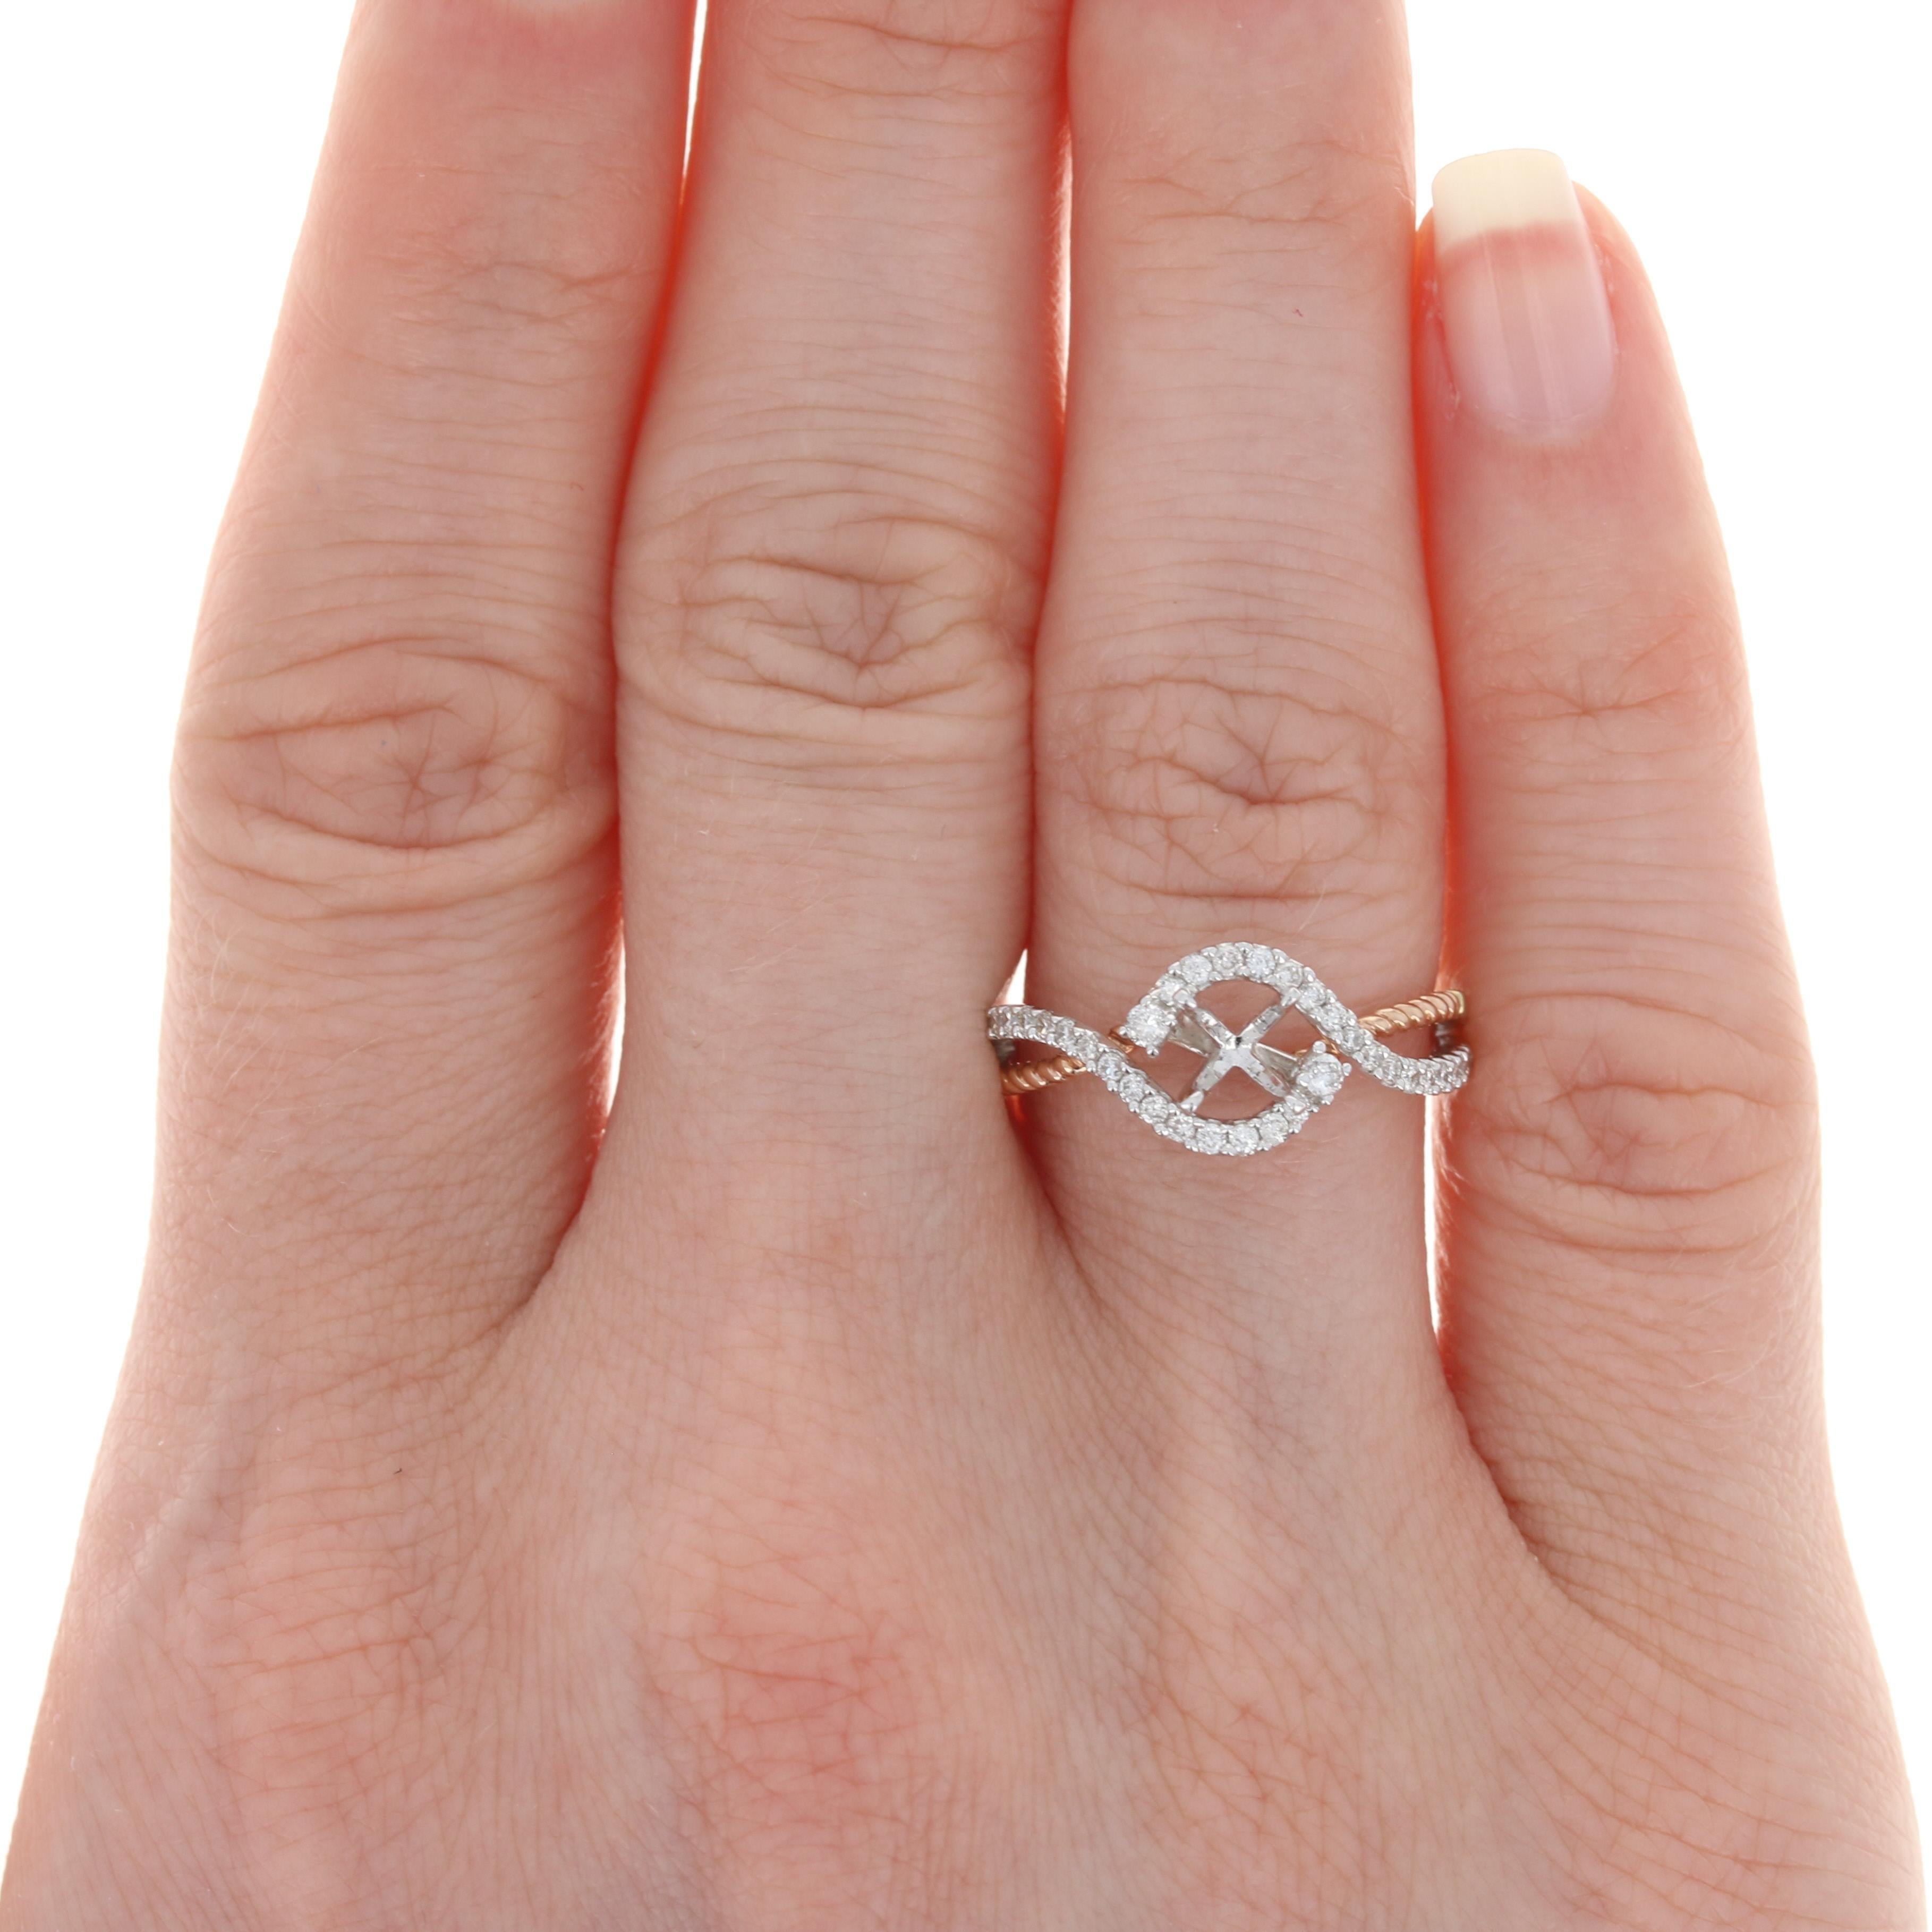 Updating your wedding set is a great way to commemorate a milestone anniversary! This NEW set is fashioned in two types of 14k gold and features a semi-mount for a diamond or gemstone measuring approximately 5mm across the center. Diamond accents